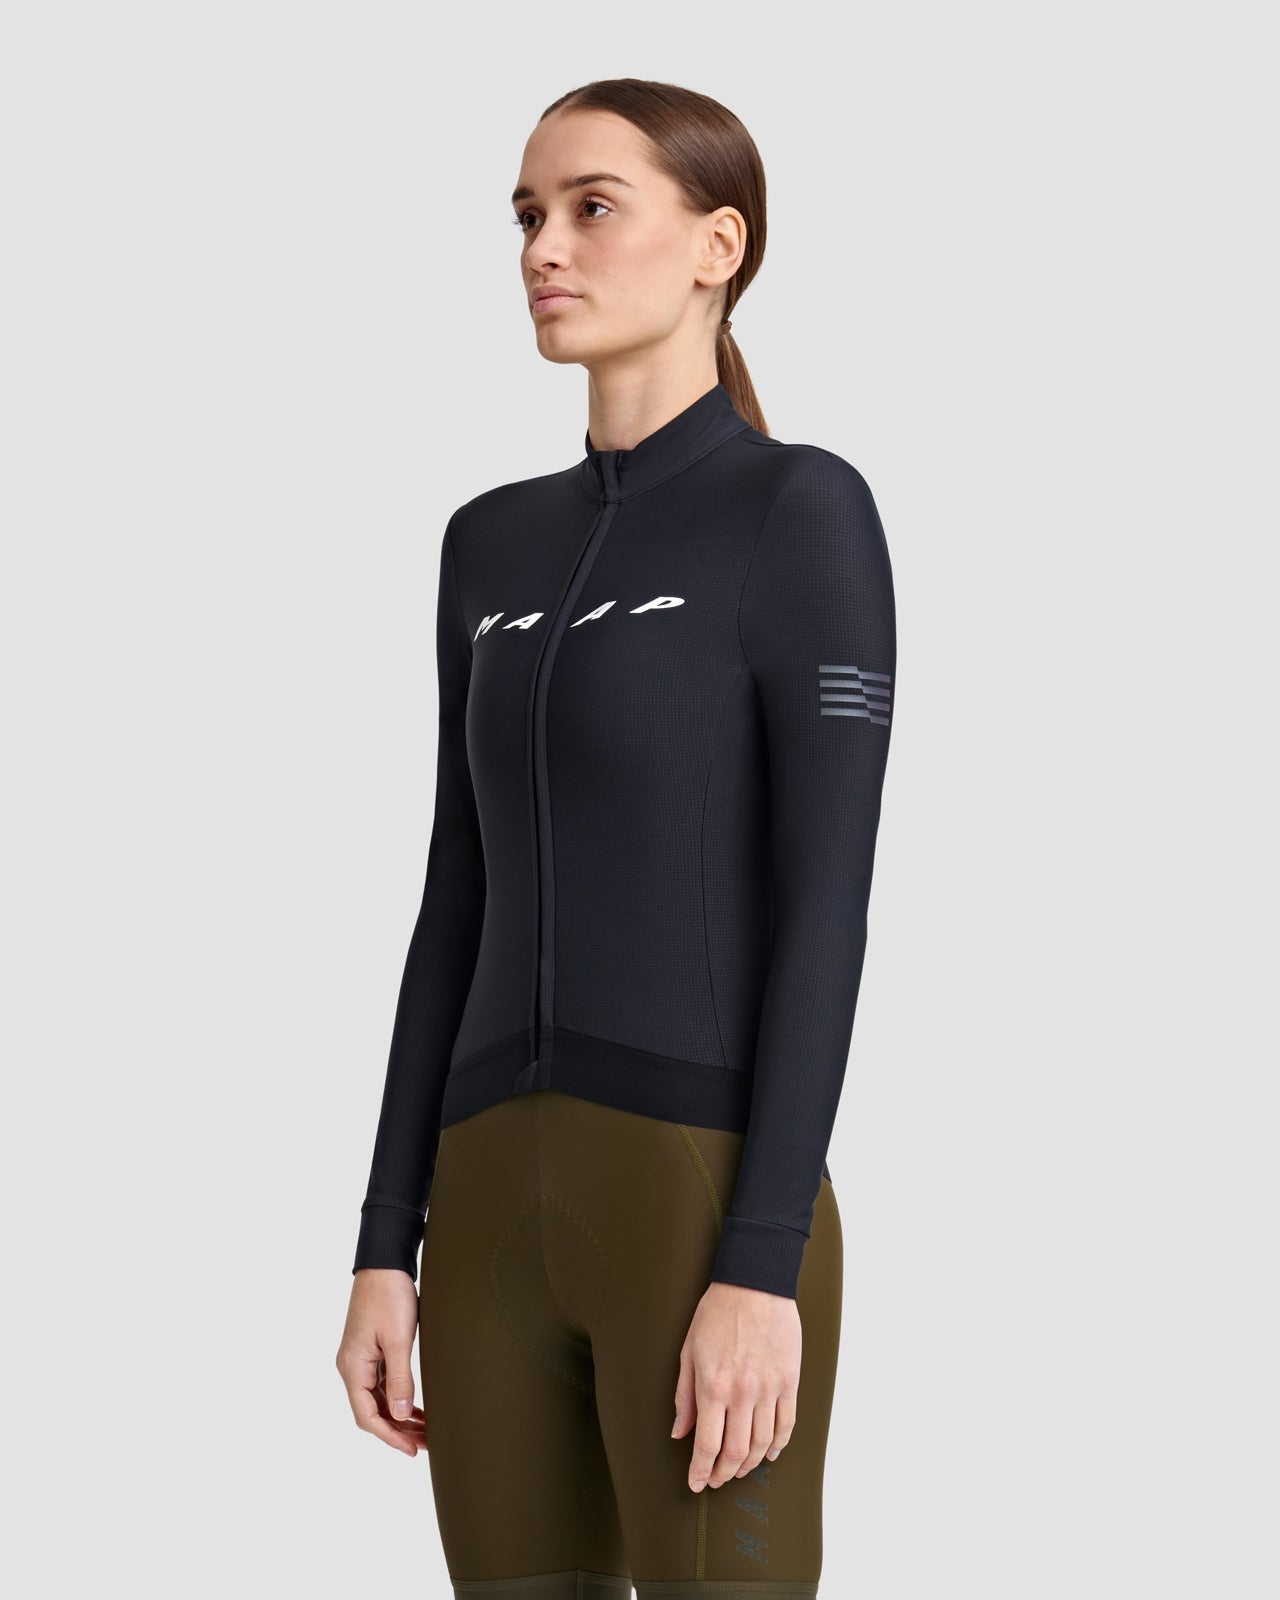 Women's Evade Thermal LS Jersey